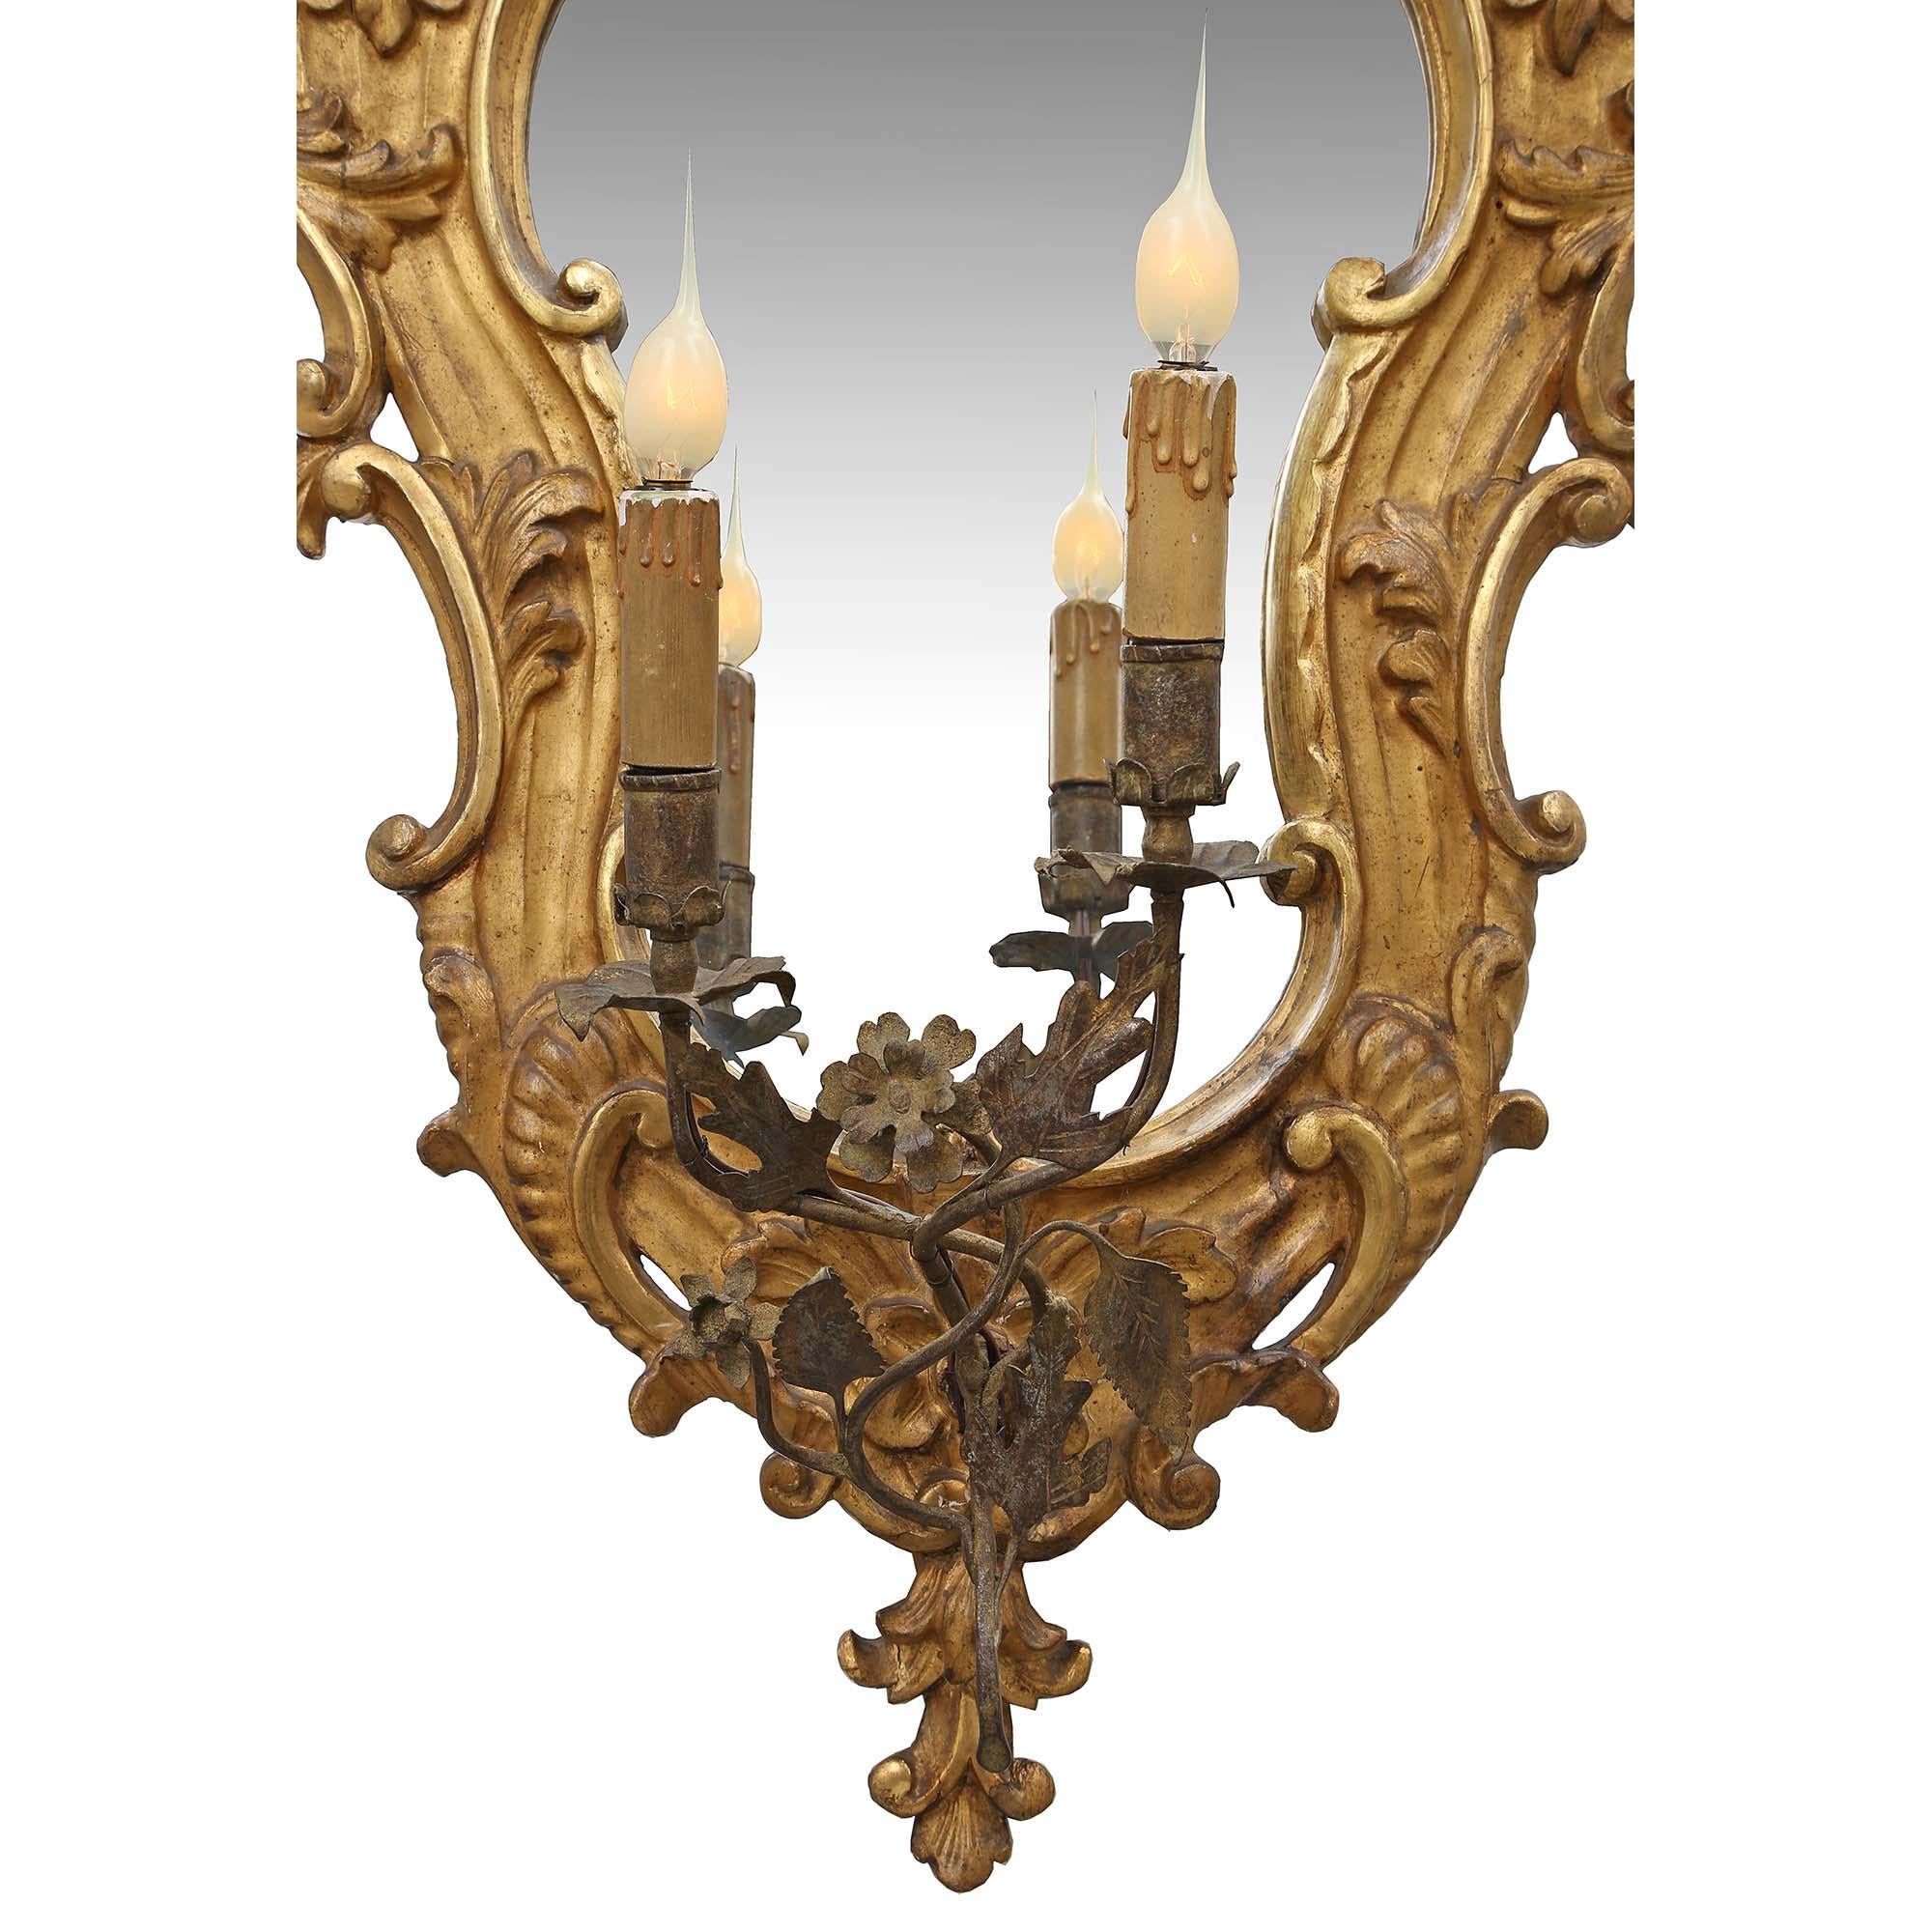 Pair of Mid-18th Century Italian Mirrored Giltwood Electrified Sconces For Sale 1